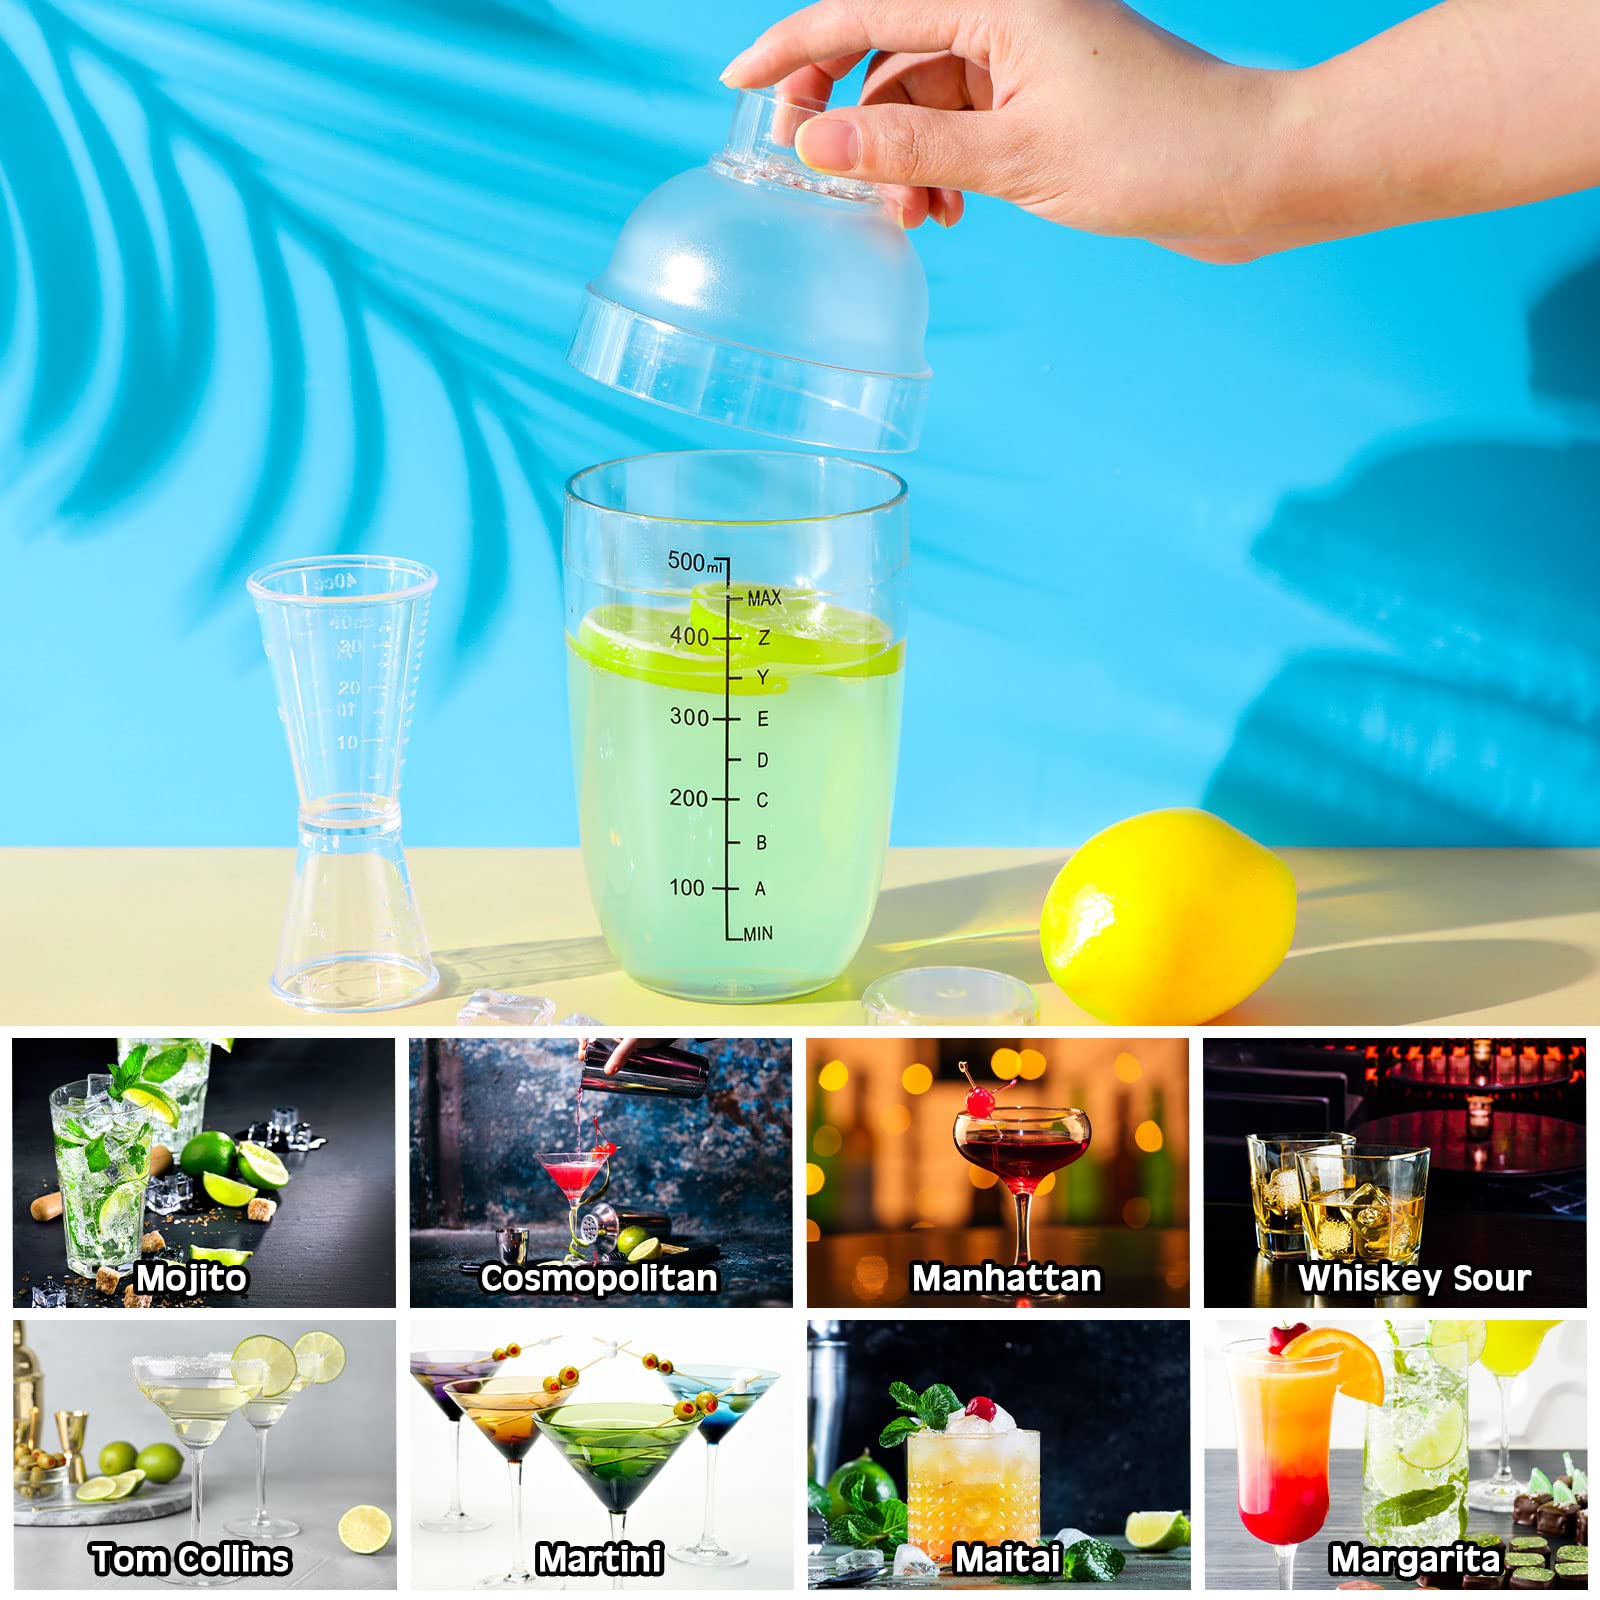 7 Pcs Plastic Cocktail Shaker Set Drink Mixer with Mark Clear Drink Shaker Cocktail Shaker and Measuring Jigger Set Ounce Cup Clear Bar Set for Bar Party Home Use Wine Shaker Bar Mixing Tool